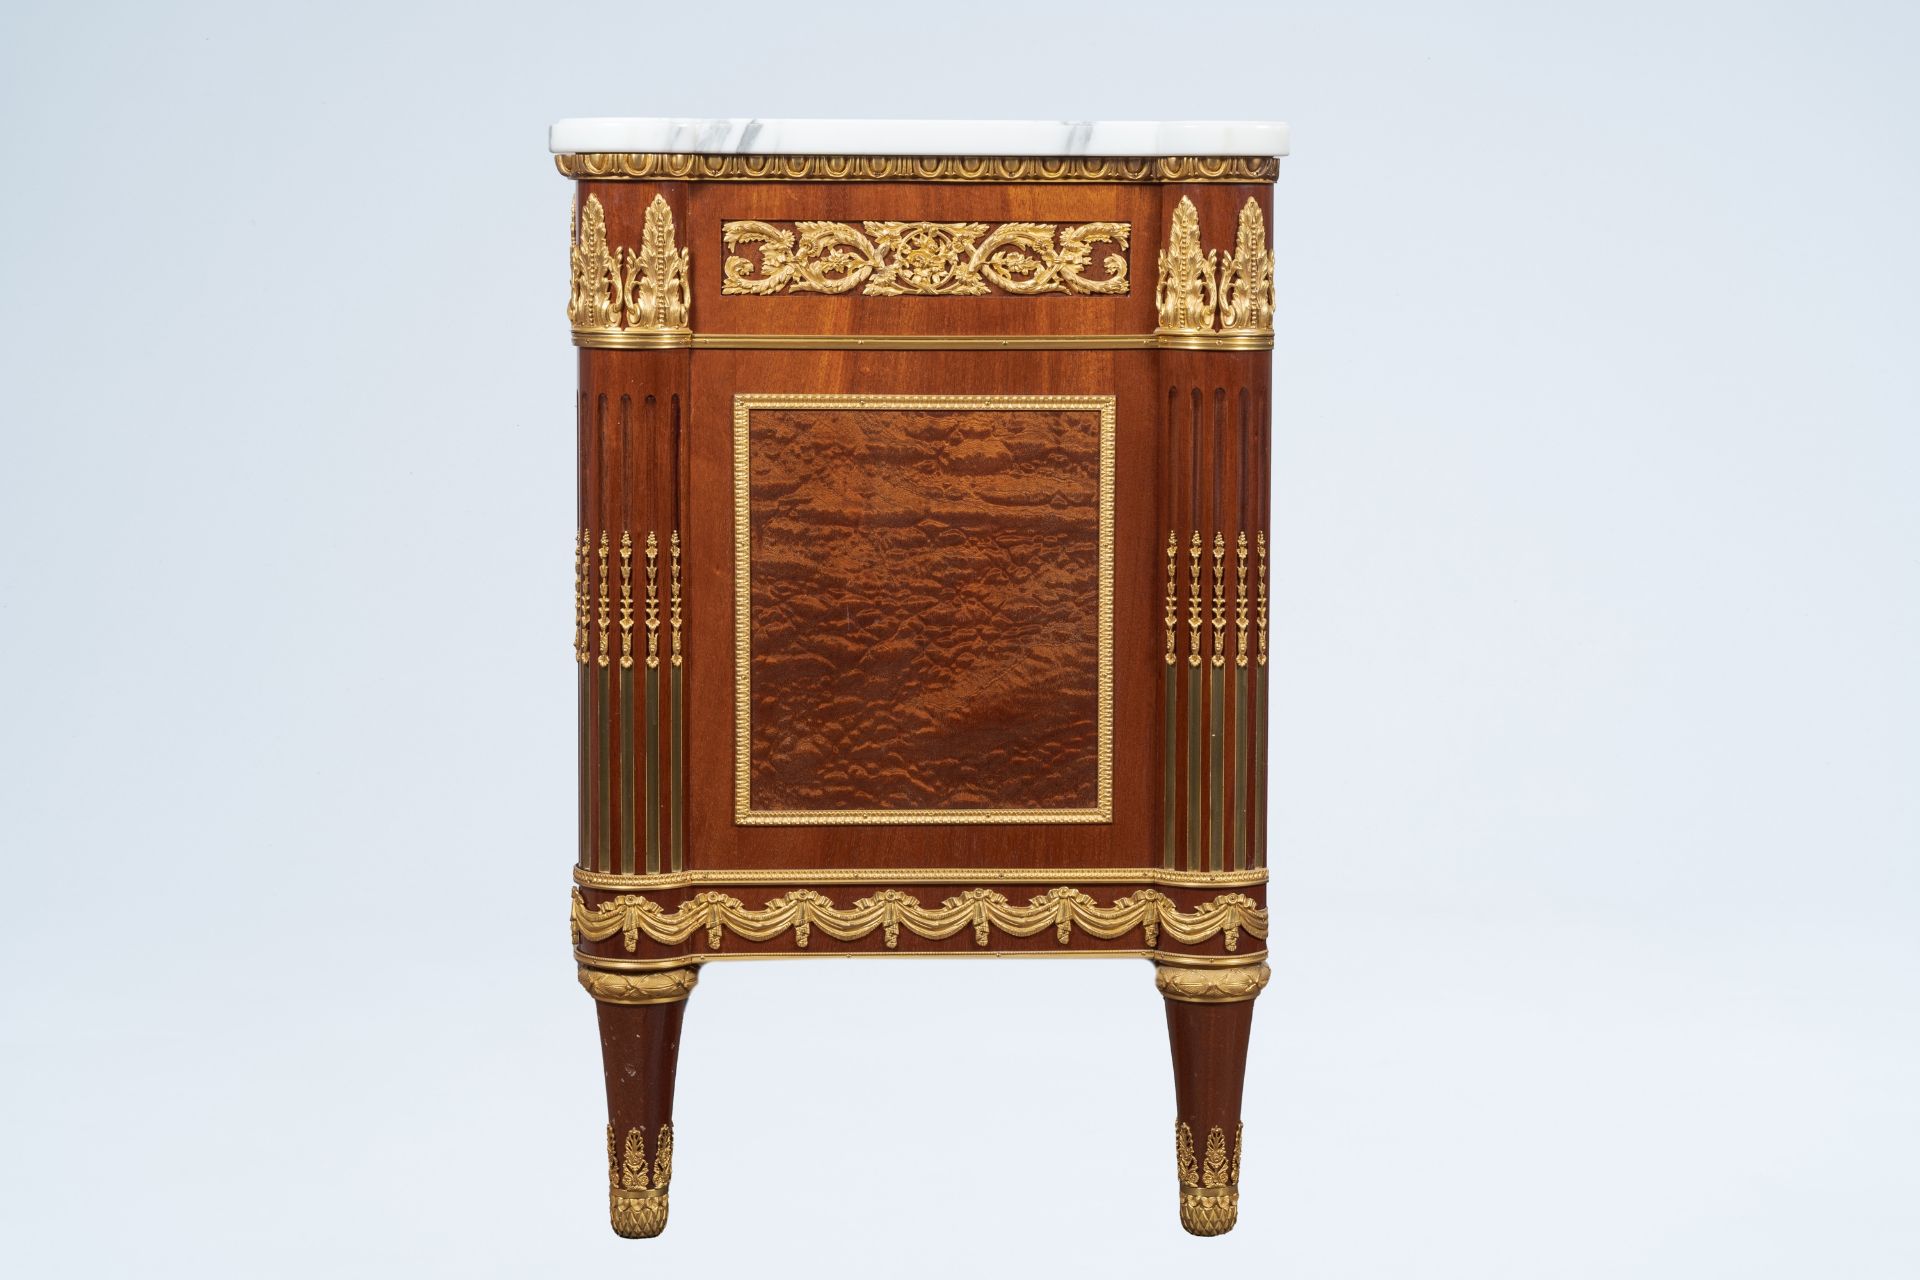 An impressive Neoclassical gilt bronze mounted wood chest of drawers with marble top, 20th C. - Image 9 of 10